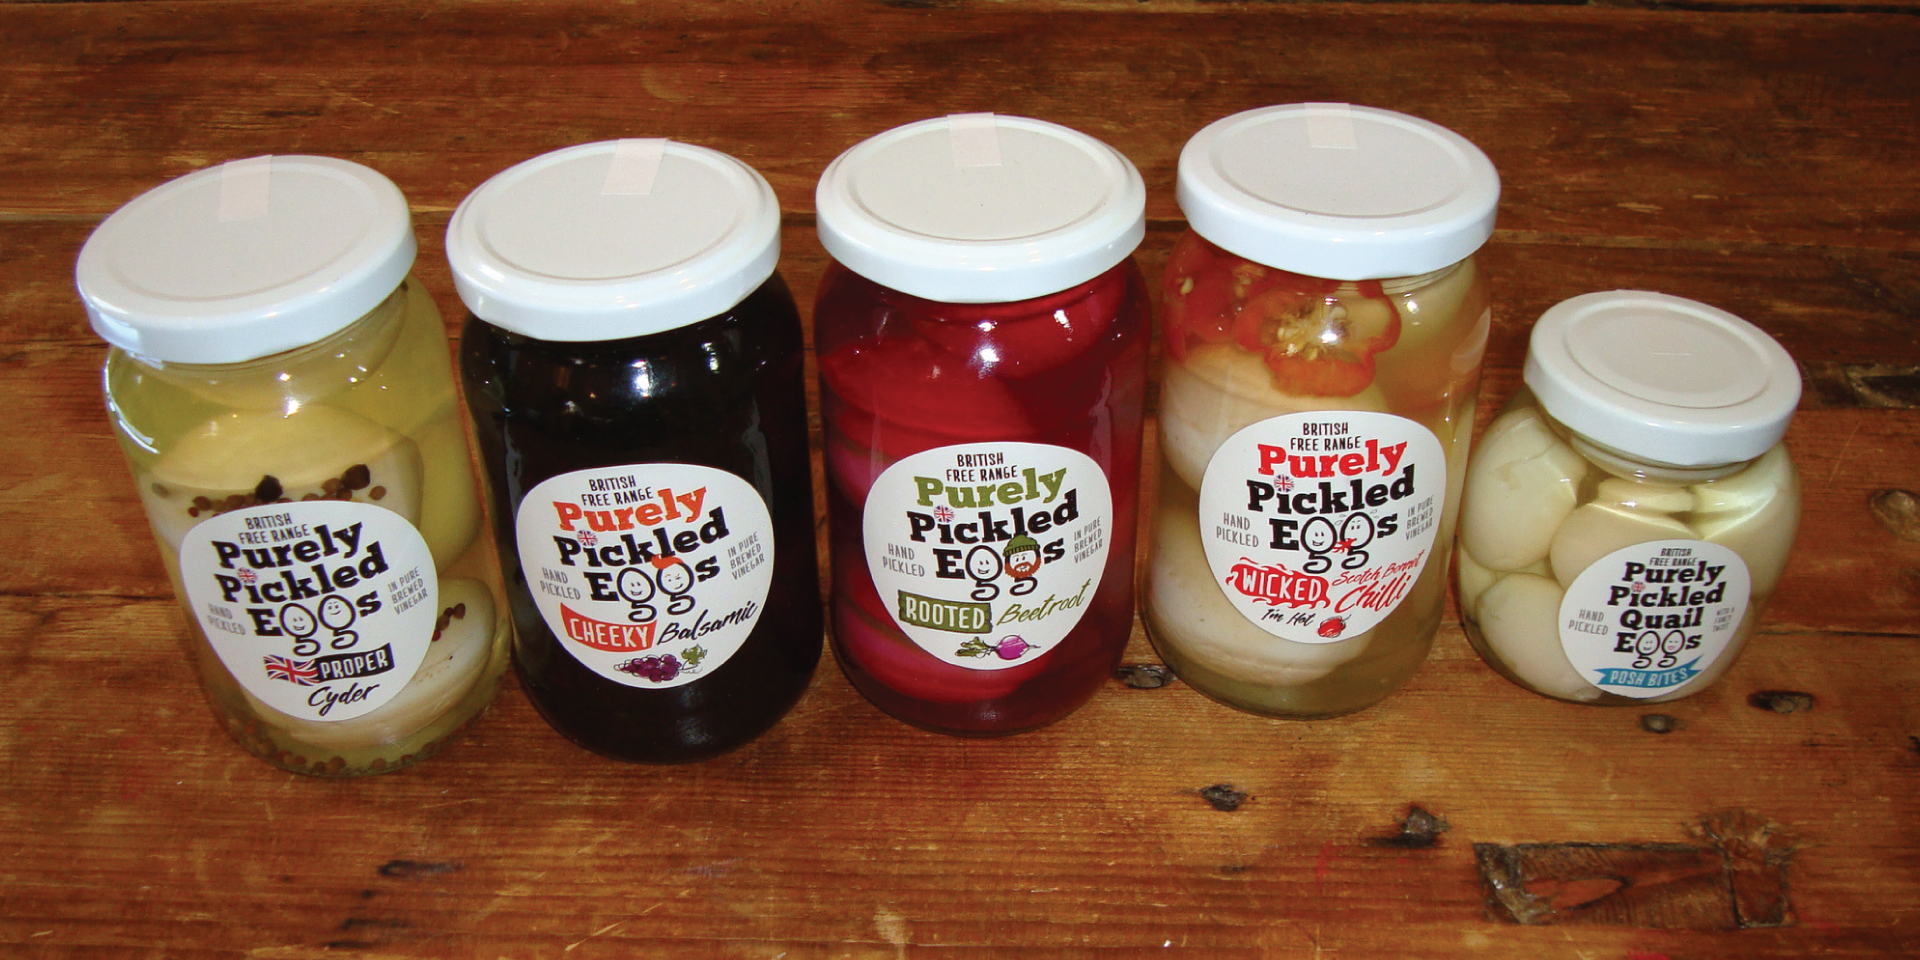 Purely Pickled Eggs Packaging Design